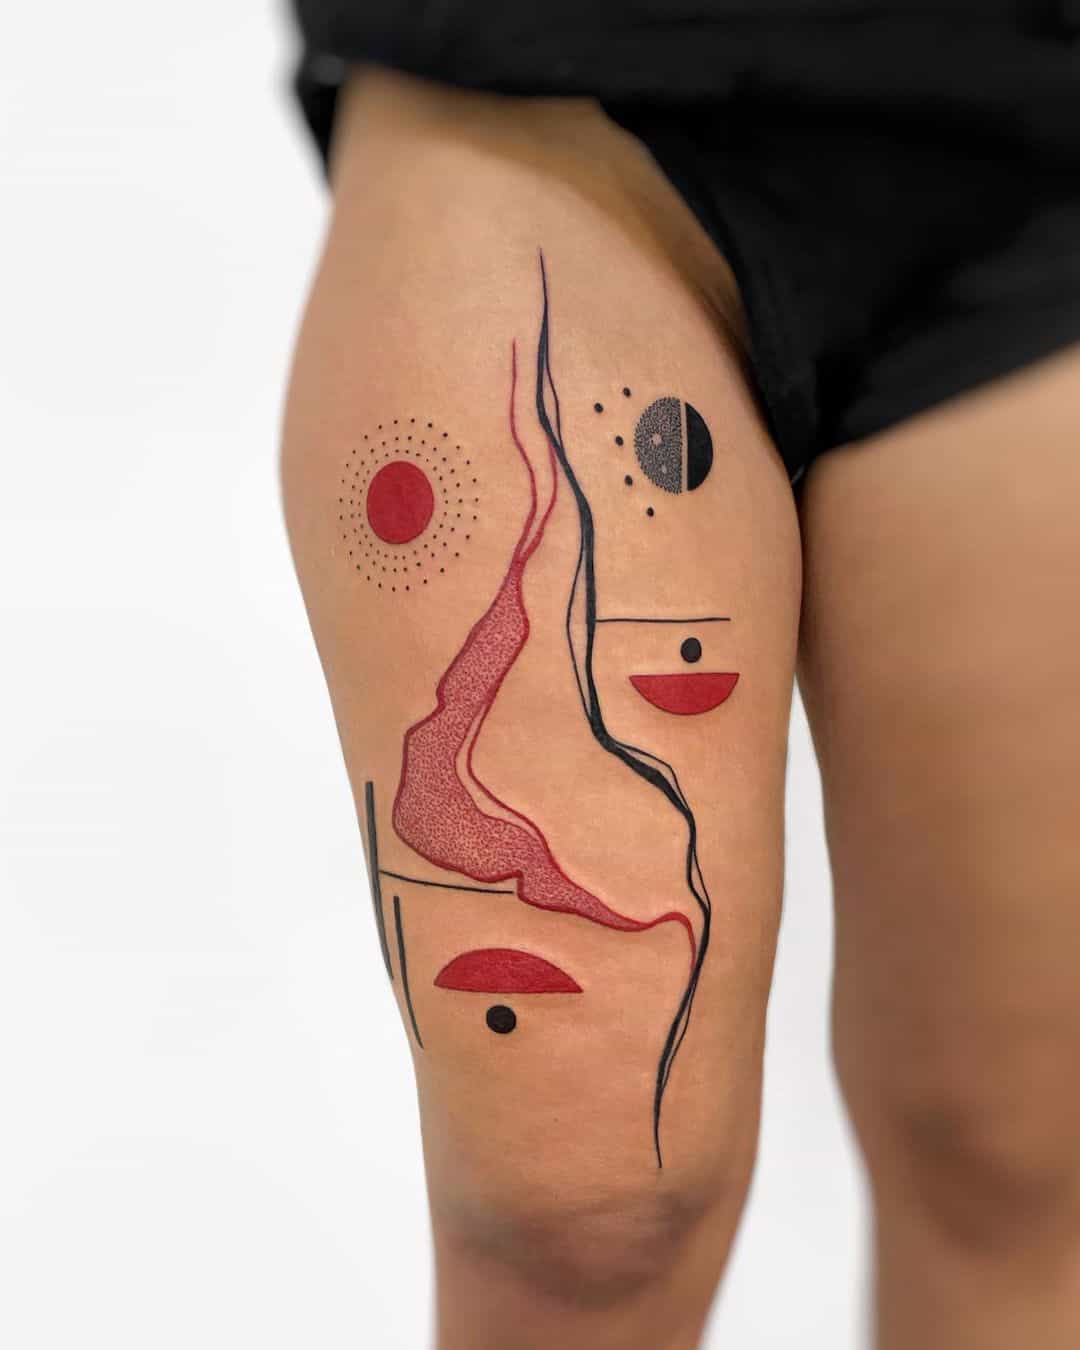 Abstract watercolor tattoo by mausendim